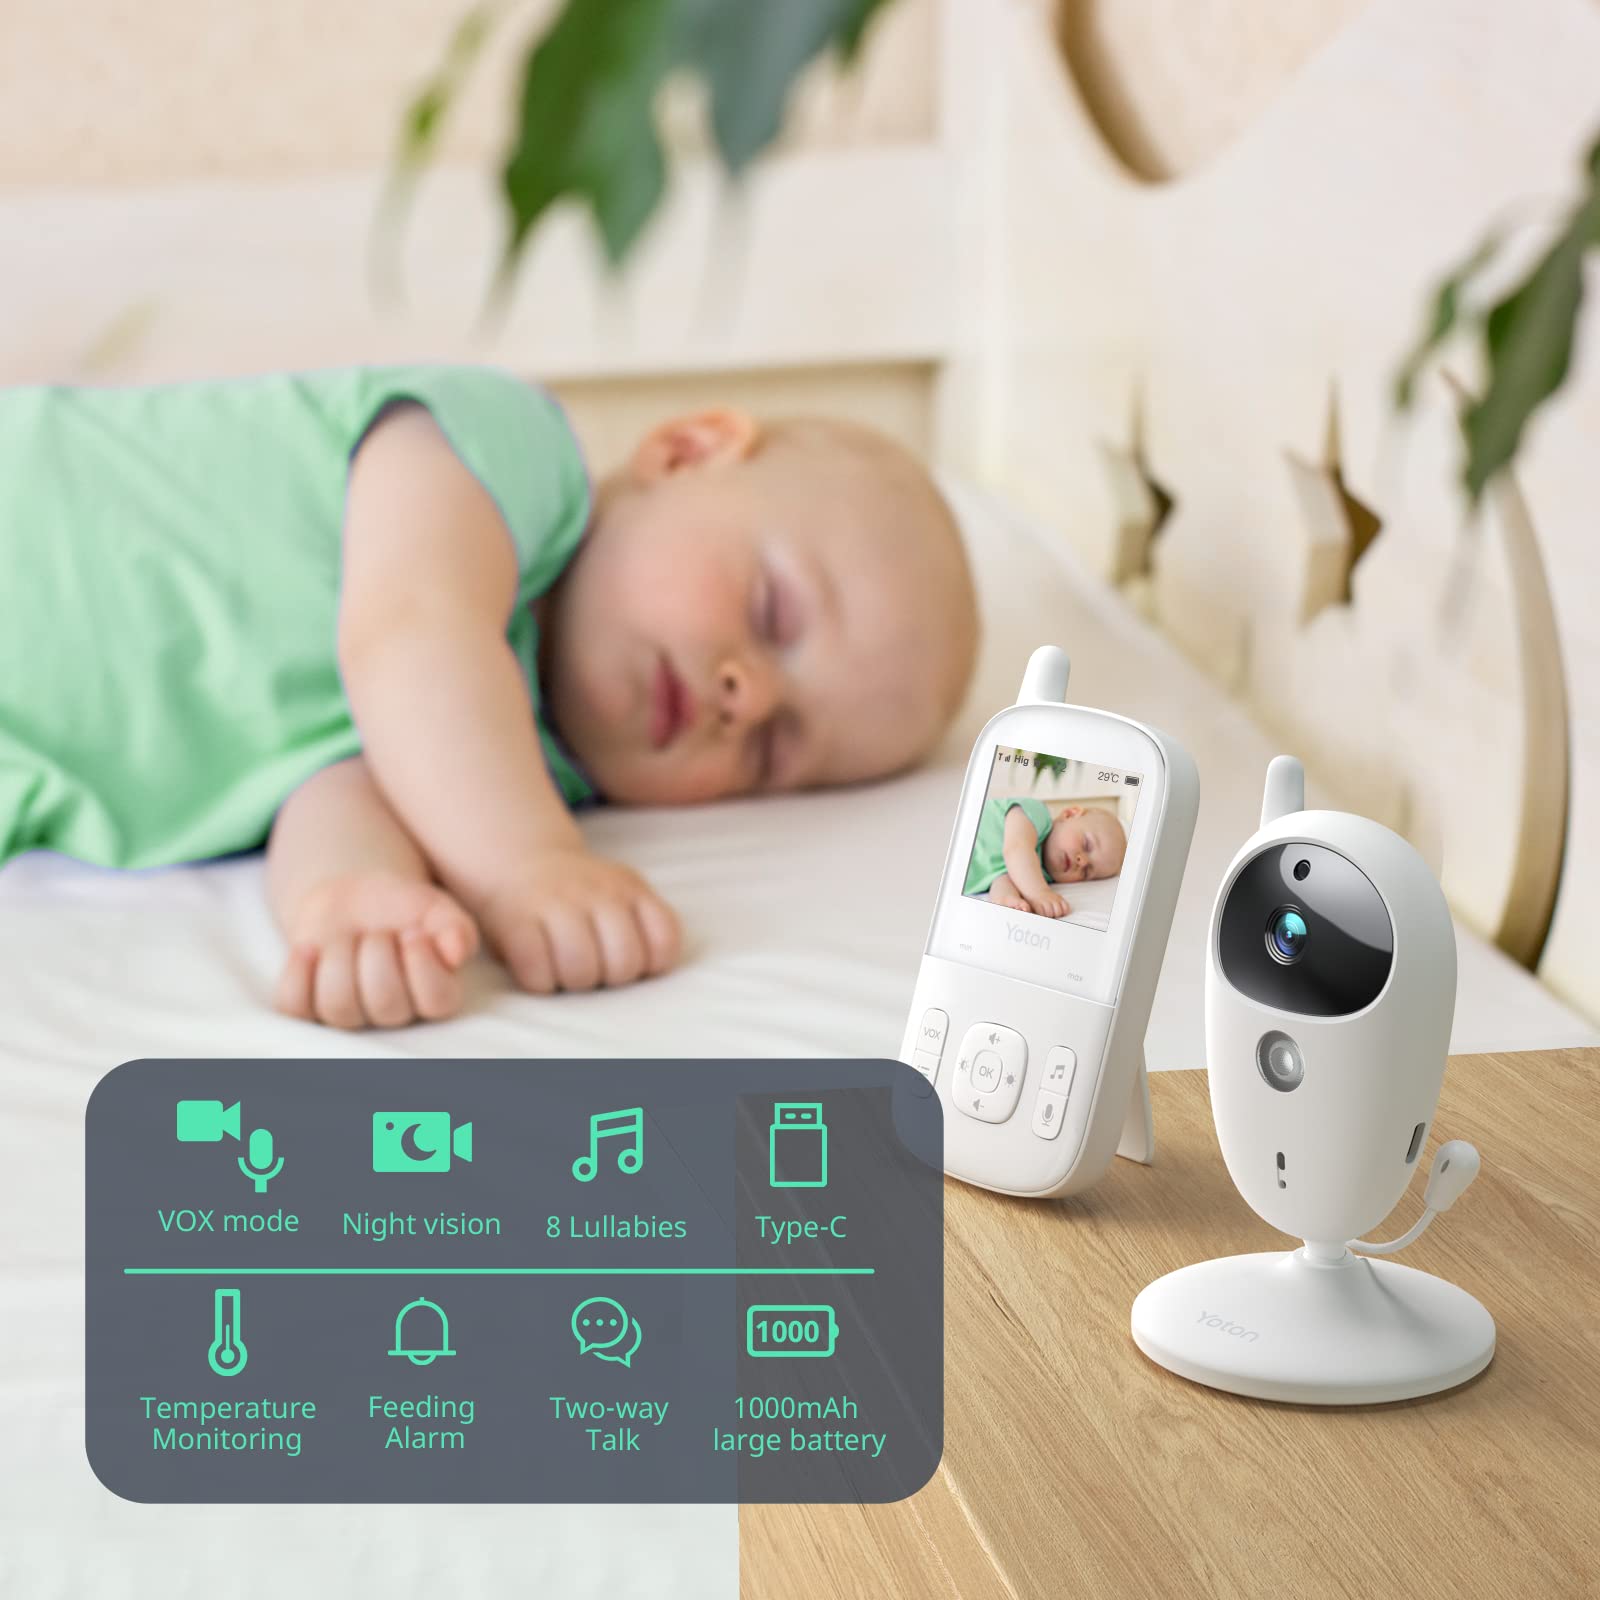 yoton YM04 portable baby monitor multiple features